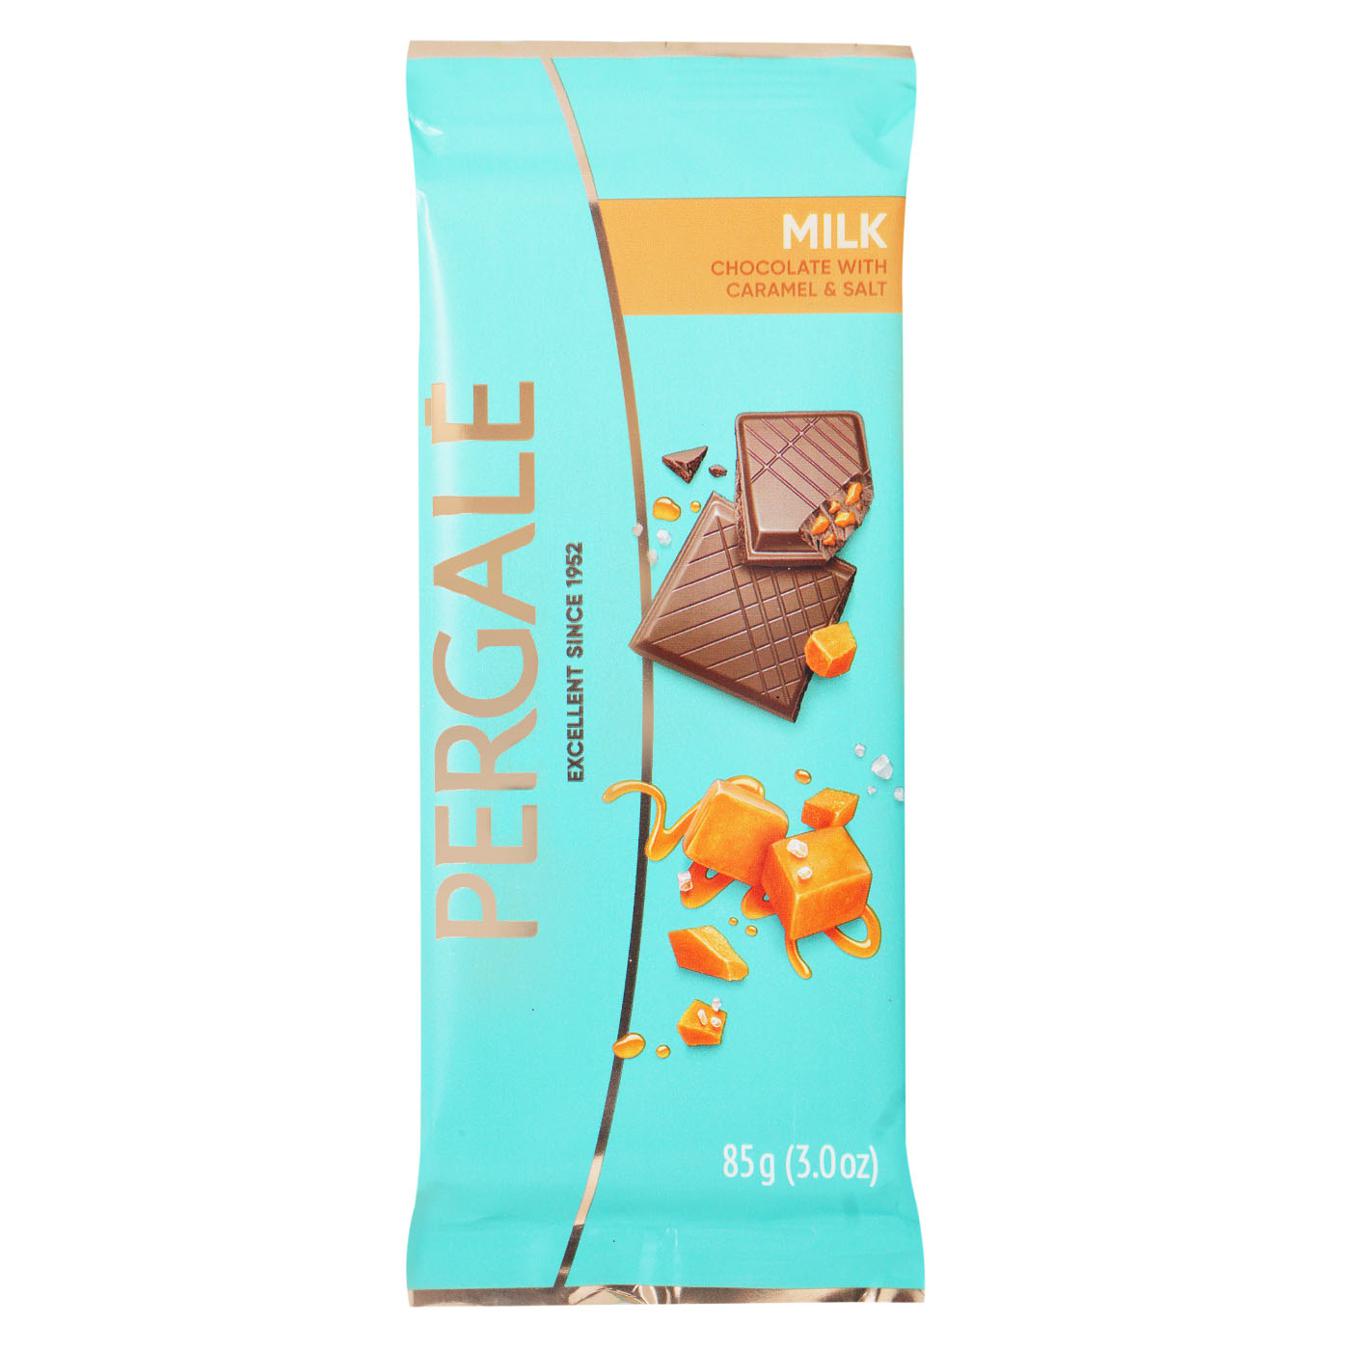 Pergale milk chocolate with caramel and salt 85g